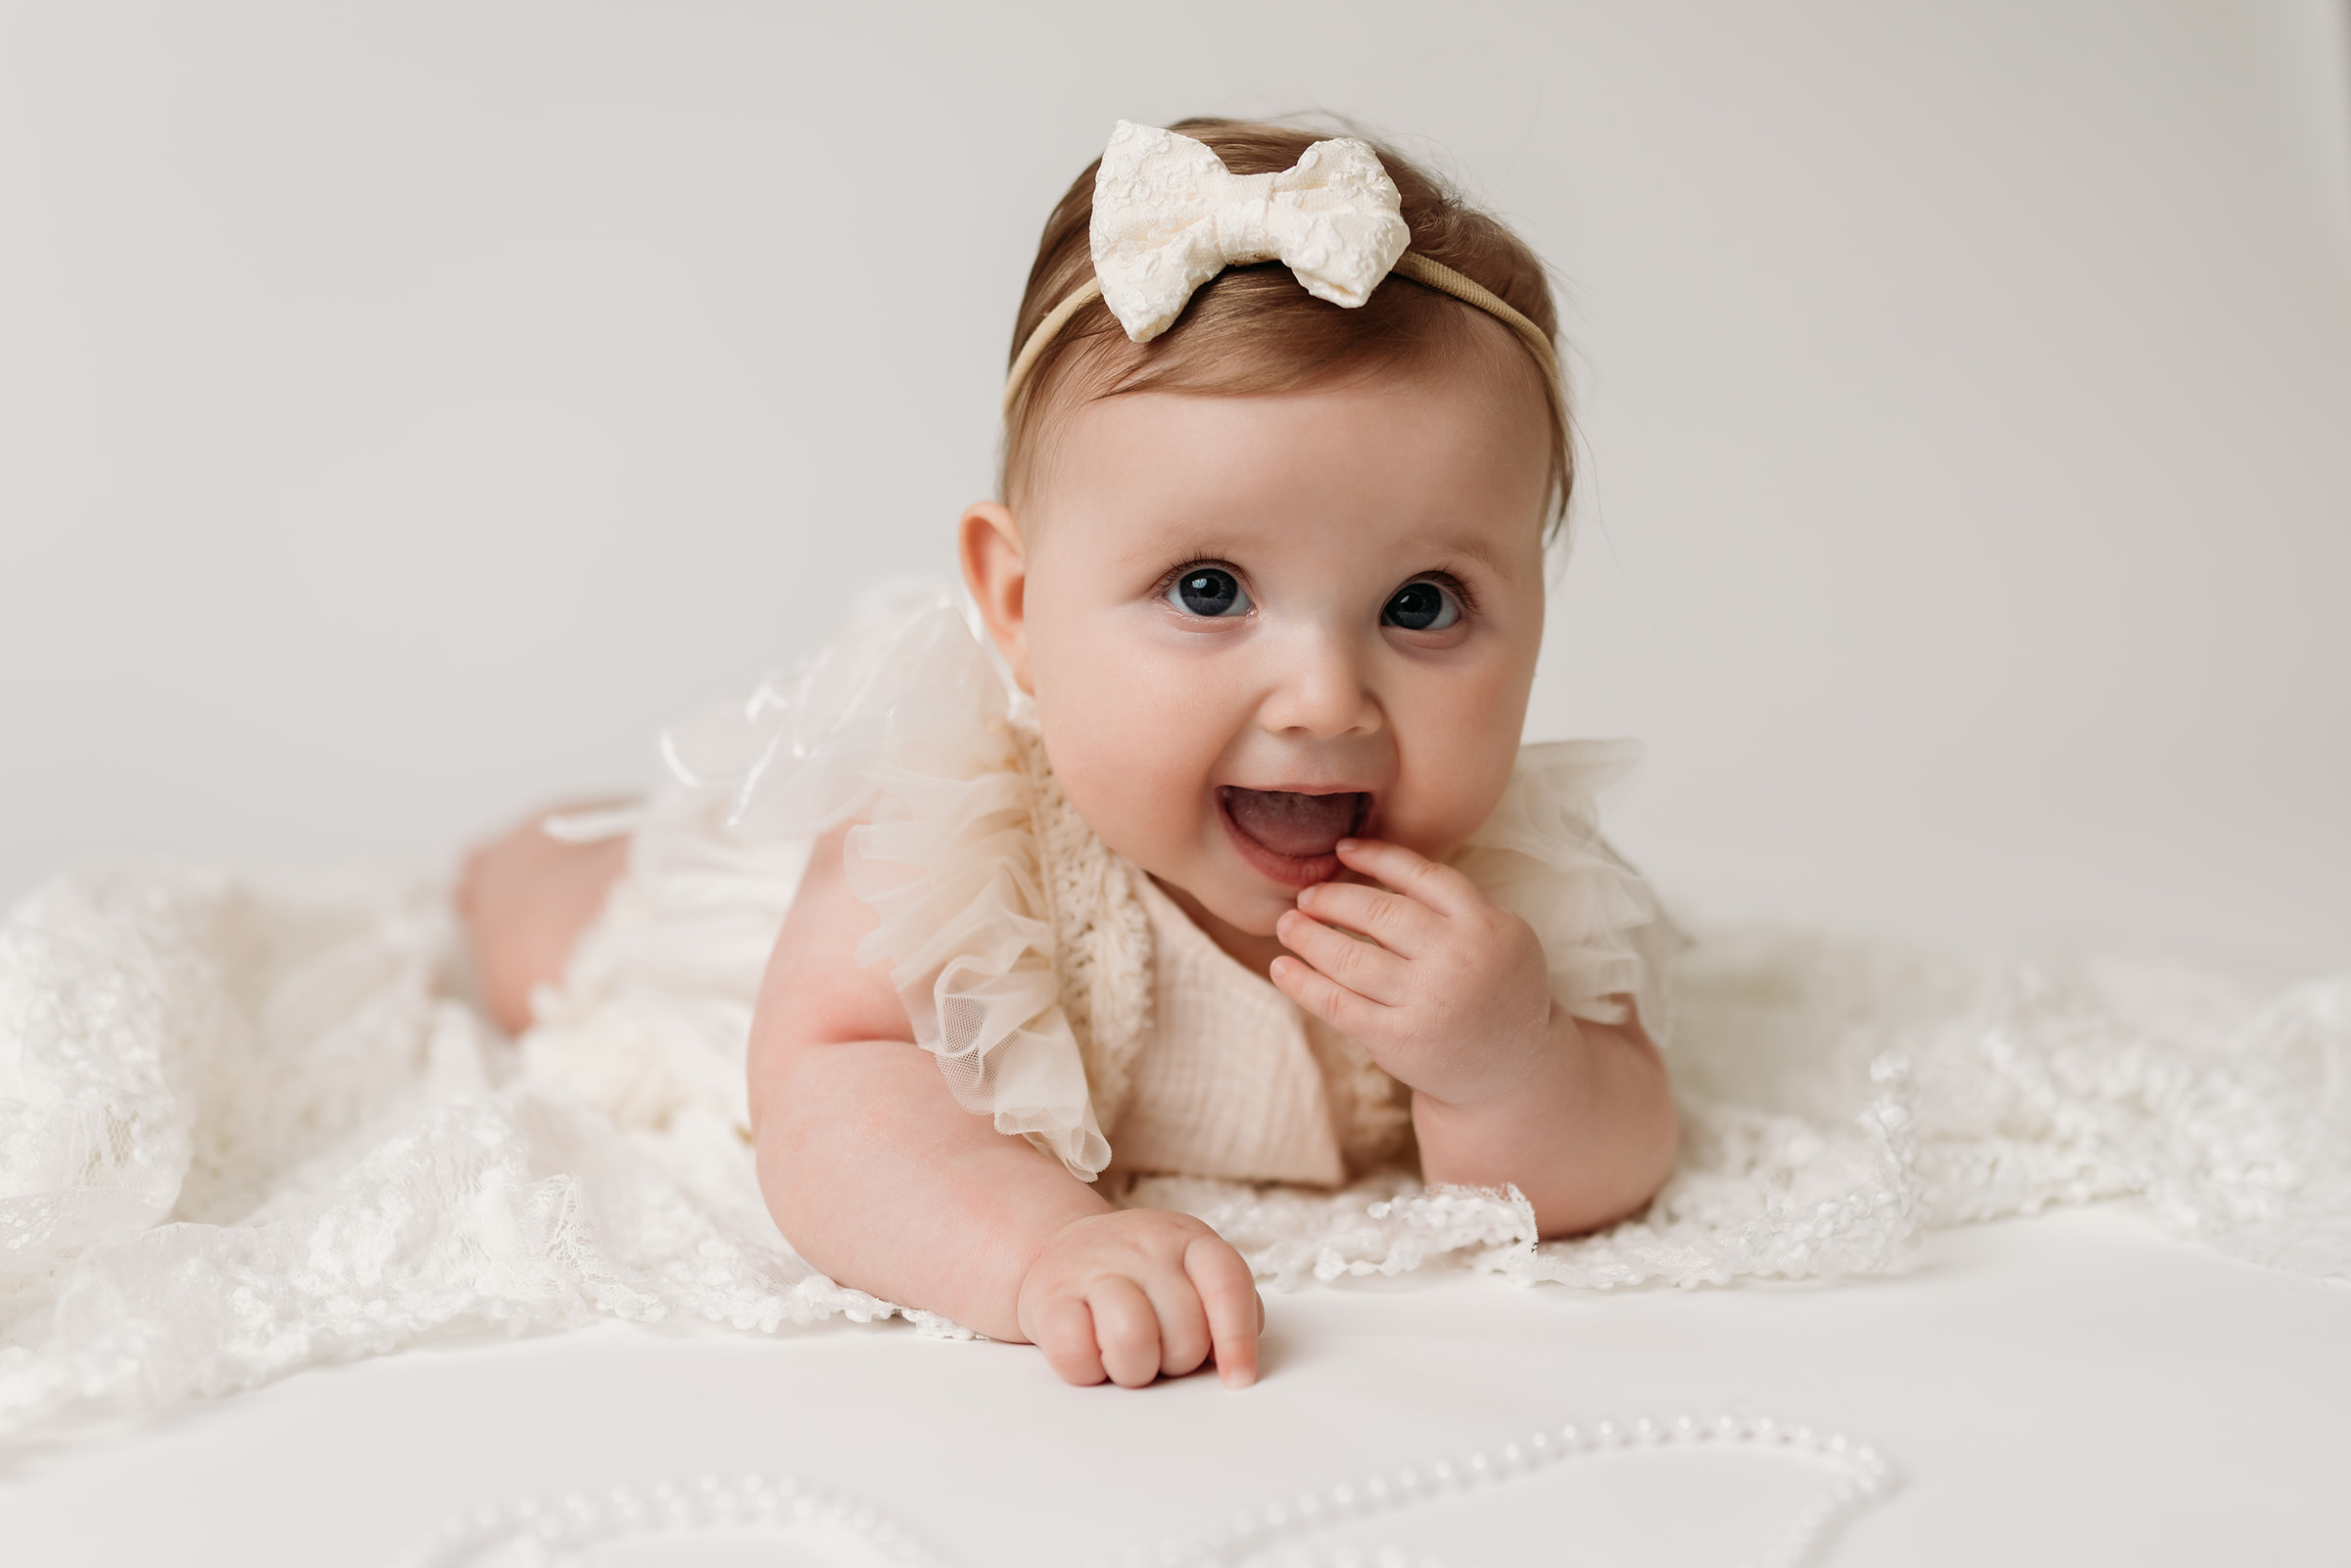 Cute 6 month old showing off tummy time on a white backdrop during her 6 month milestone photo shoot